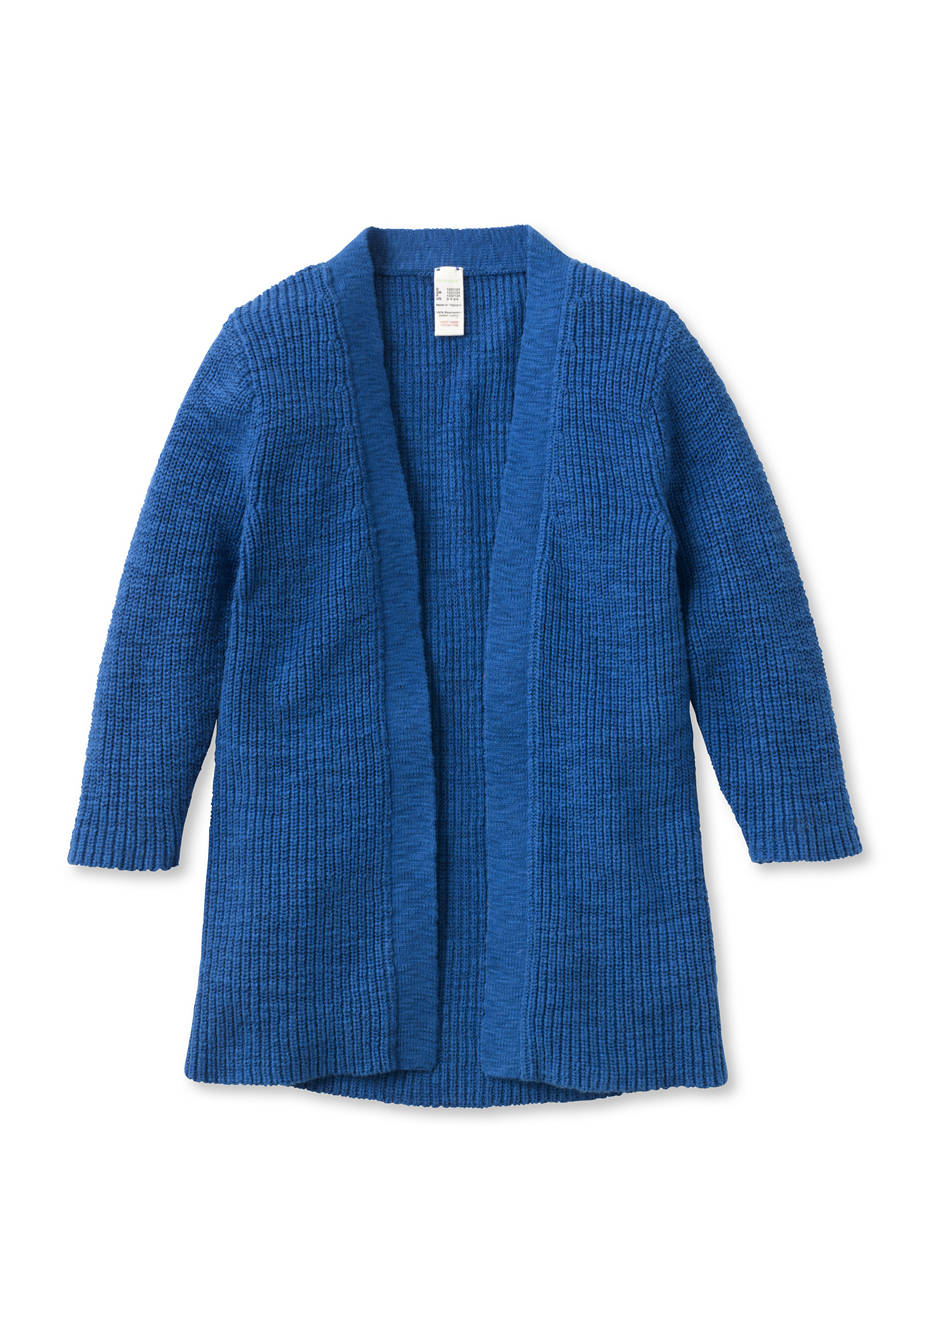 Knitted cardigan made from pure organic cotton